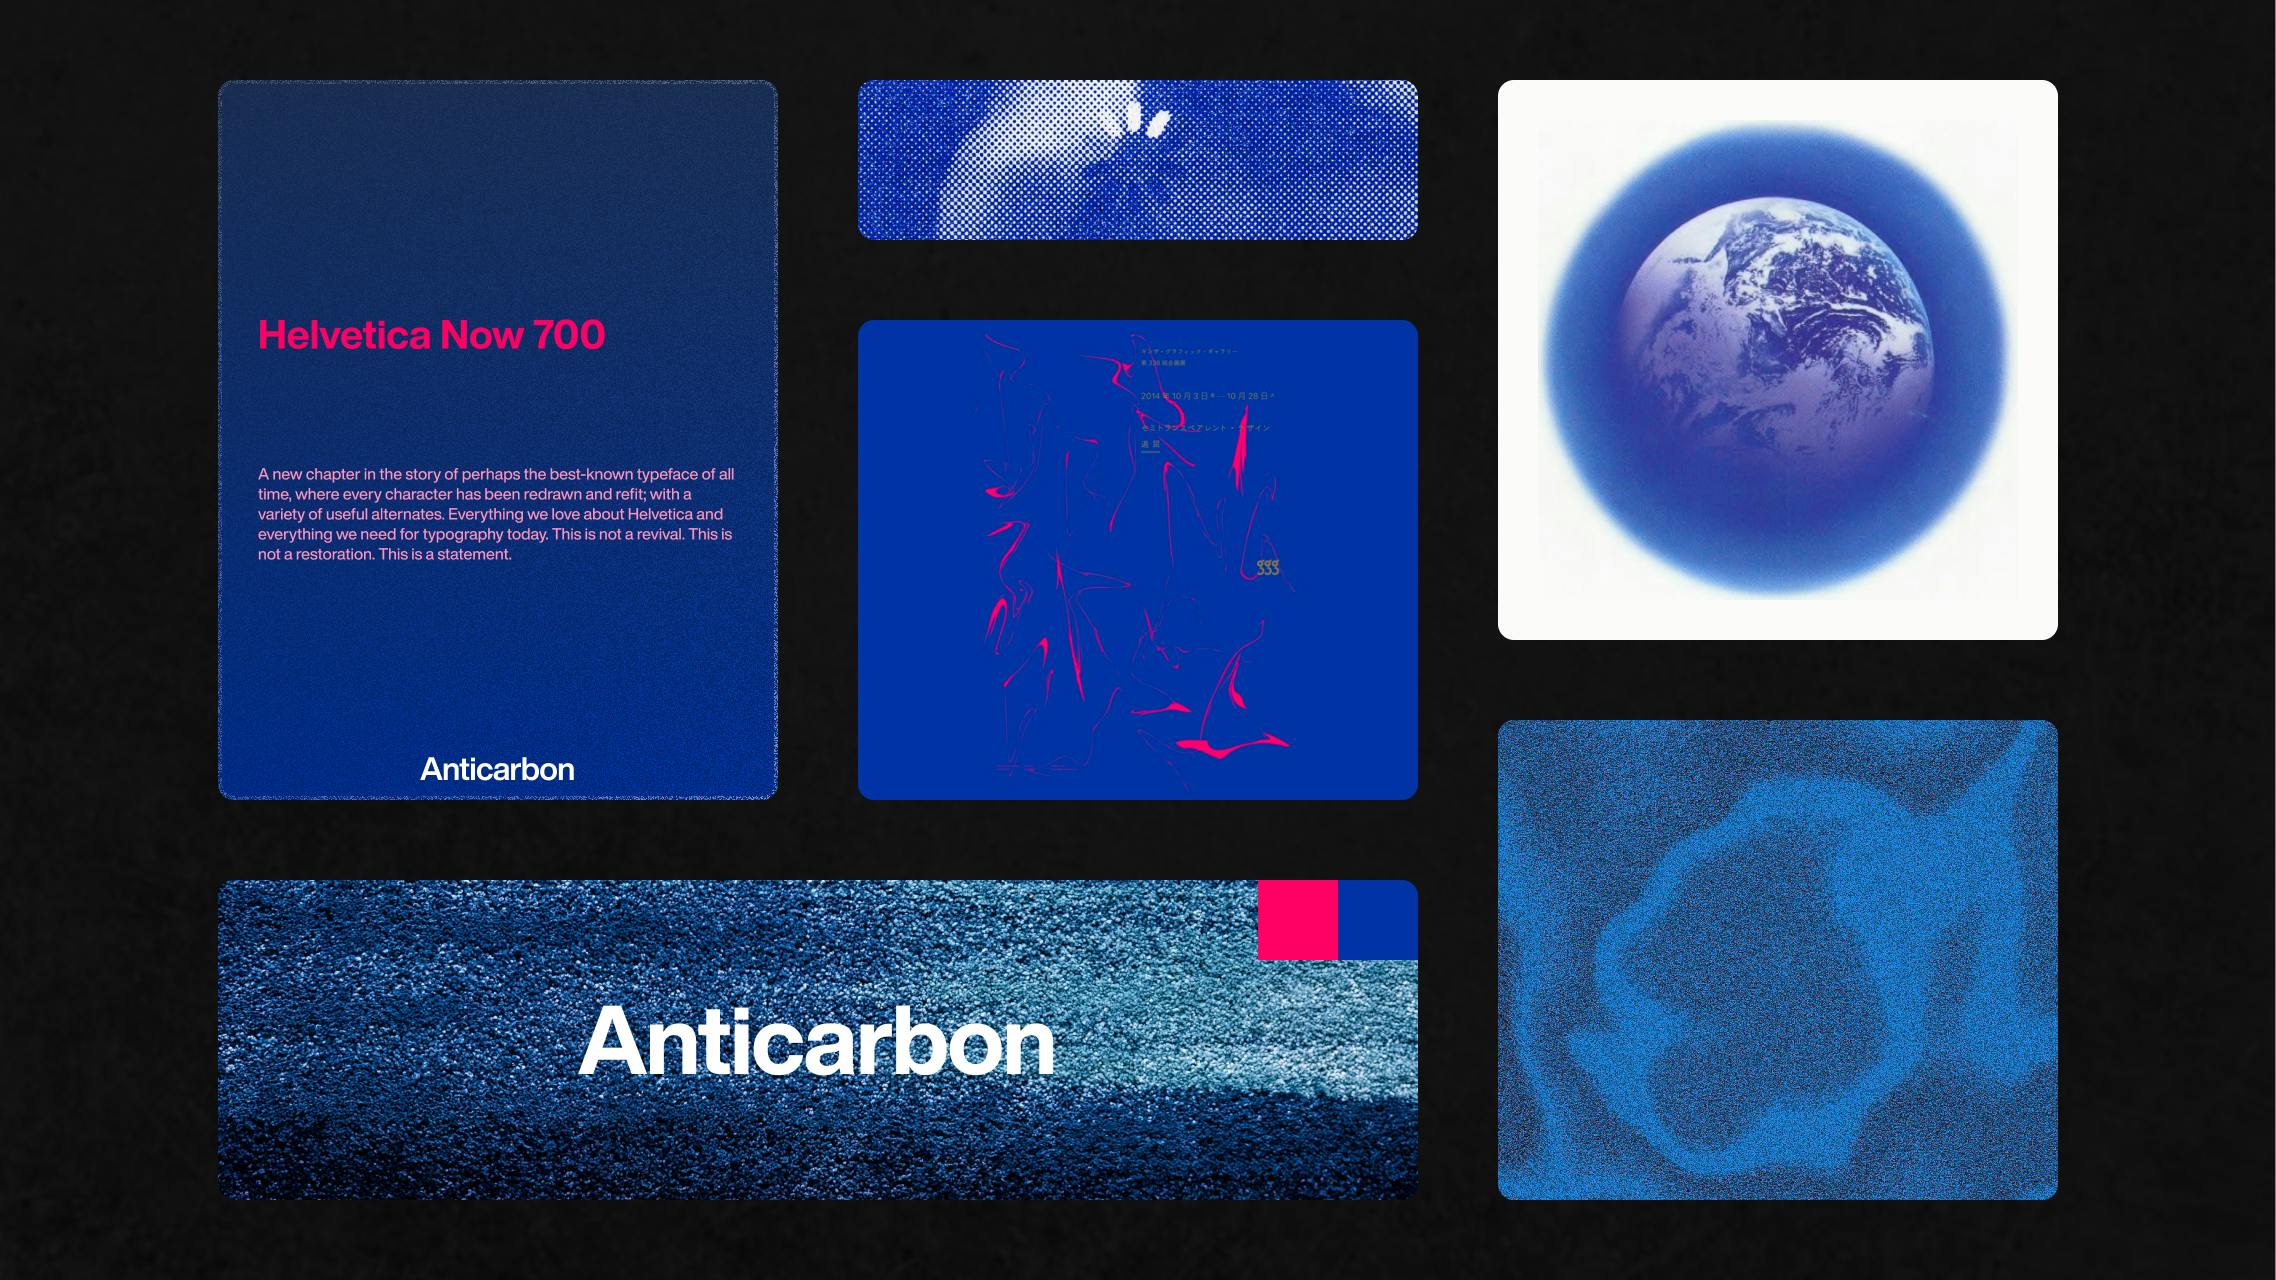 Moodboard for venture capital firm Anticarbon